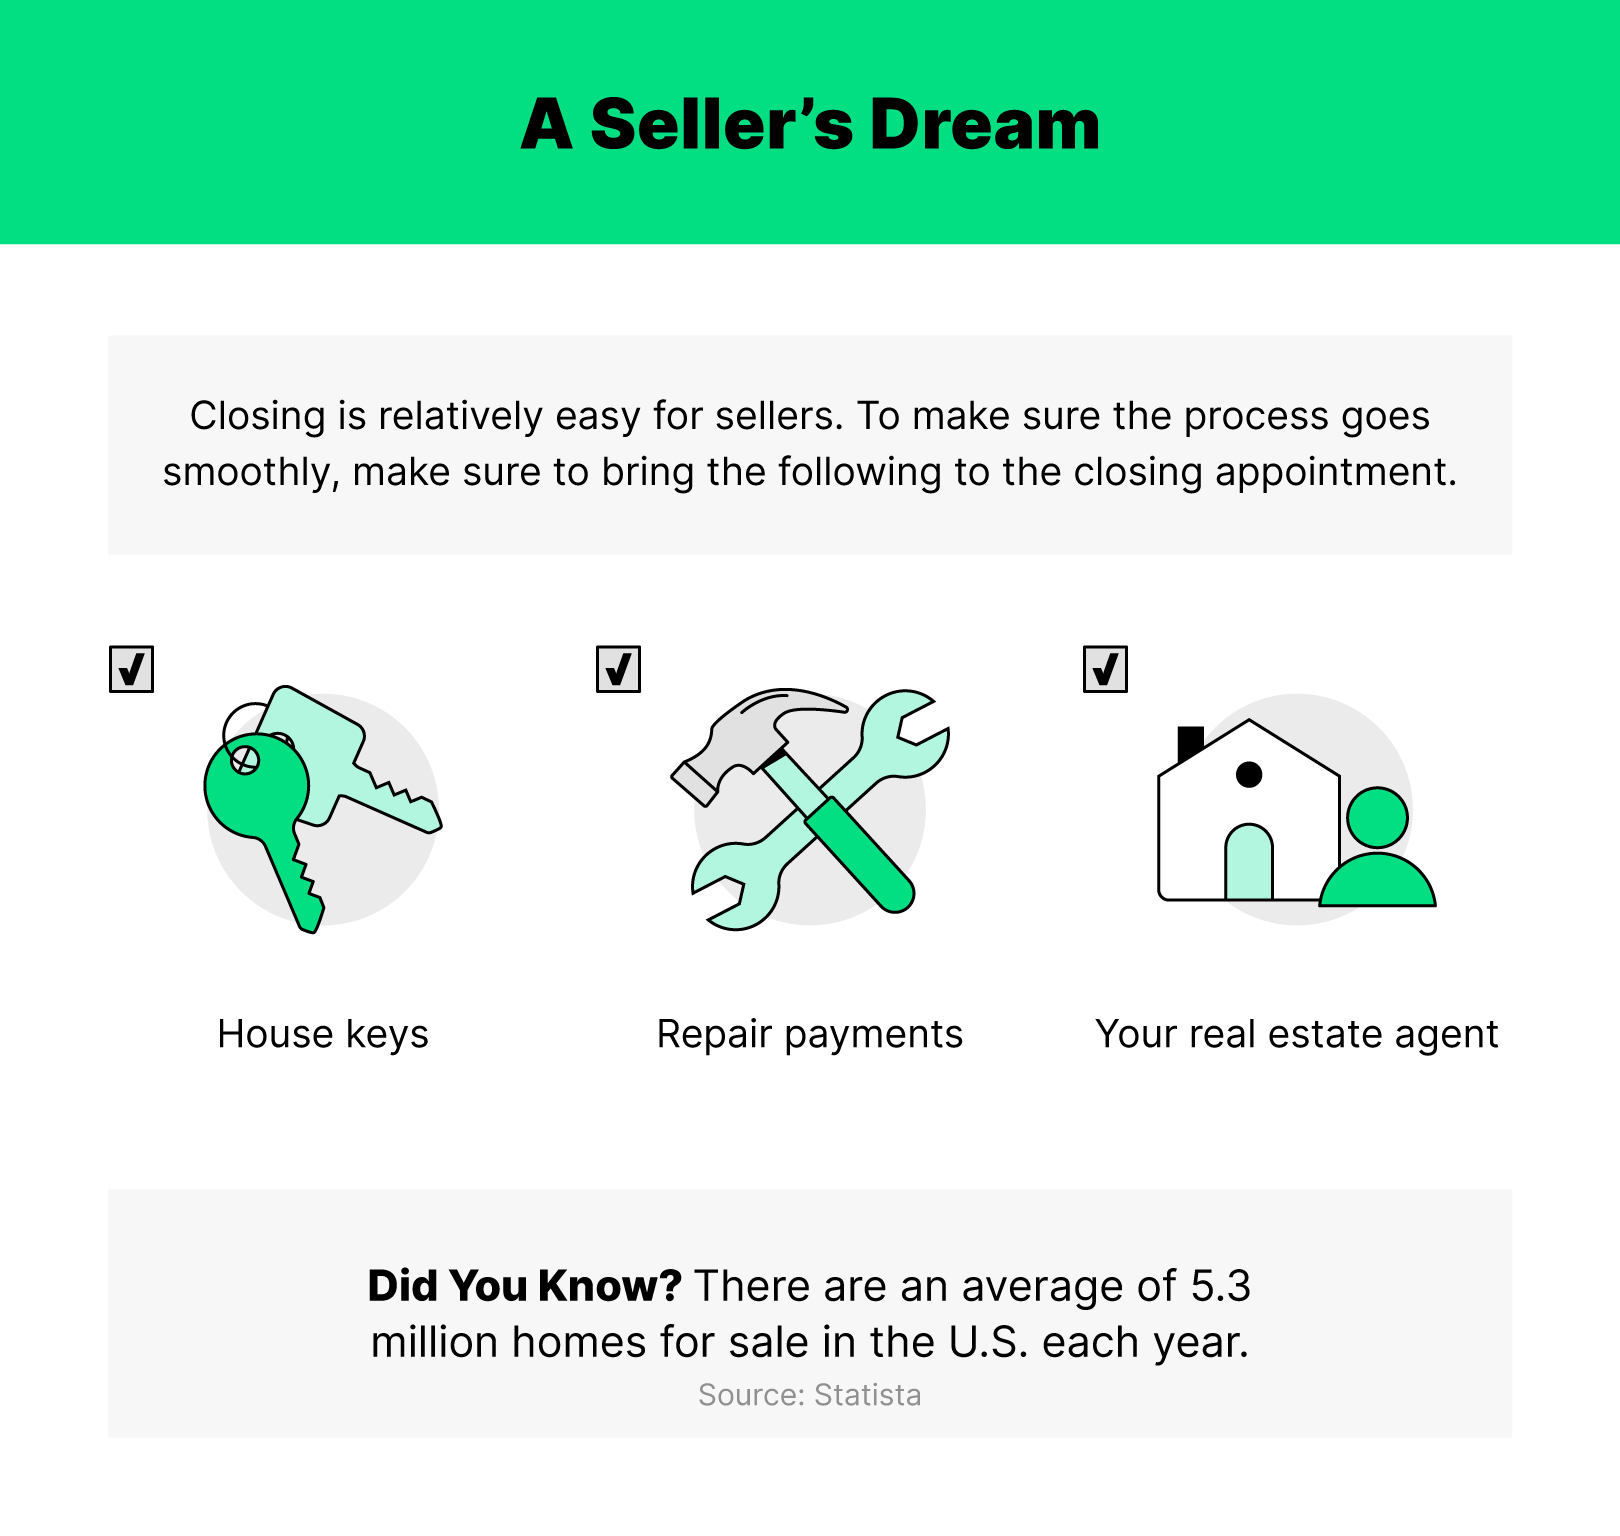 Illustrations of what sellers need to bring to closing